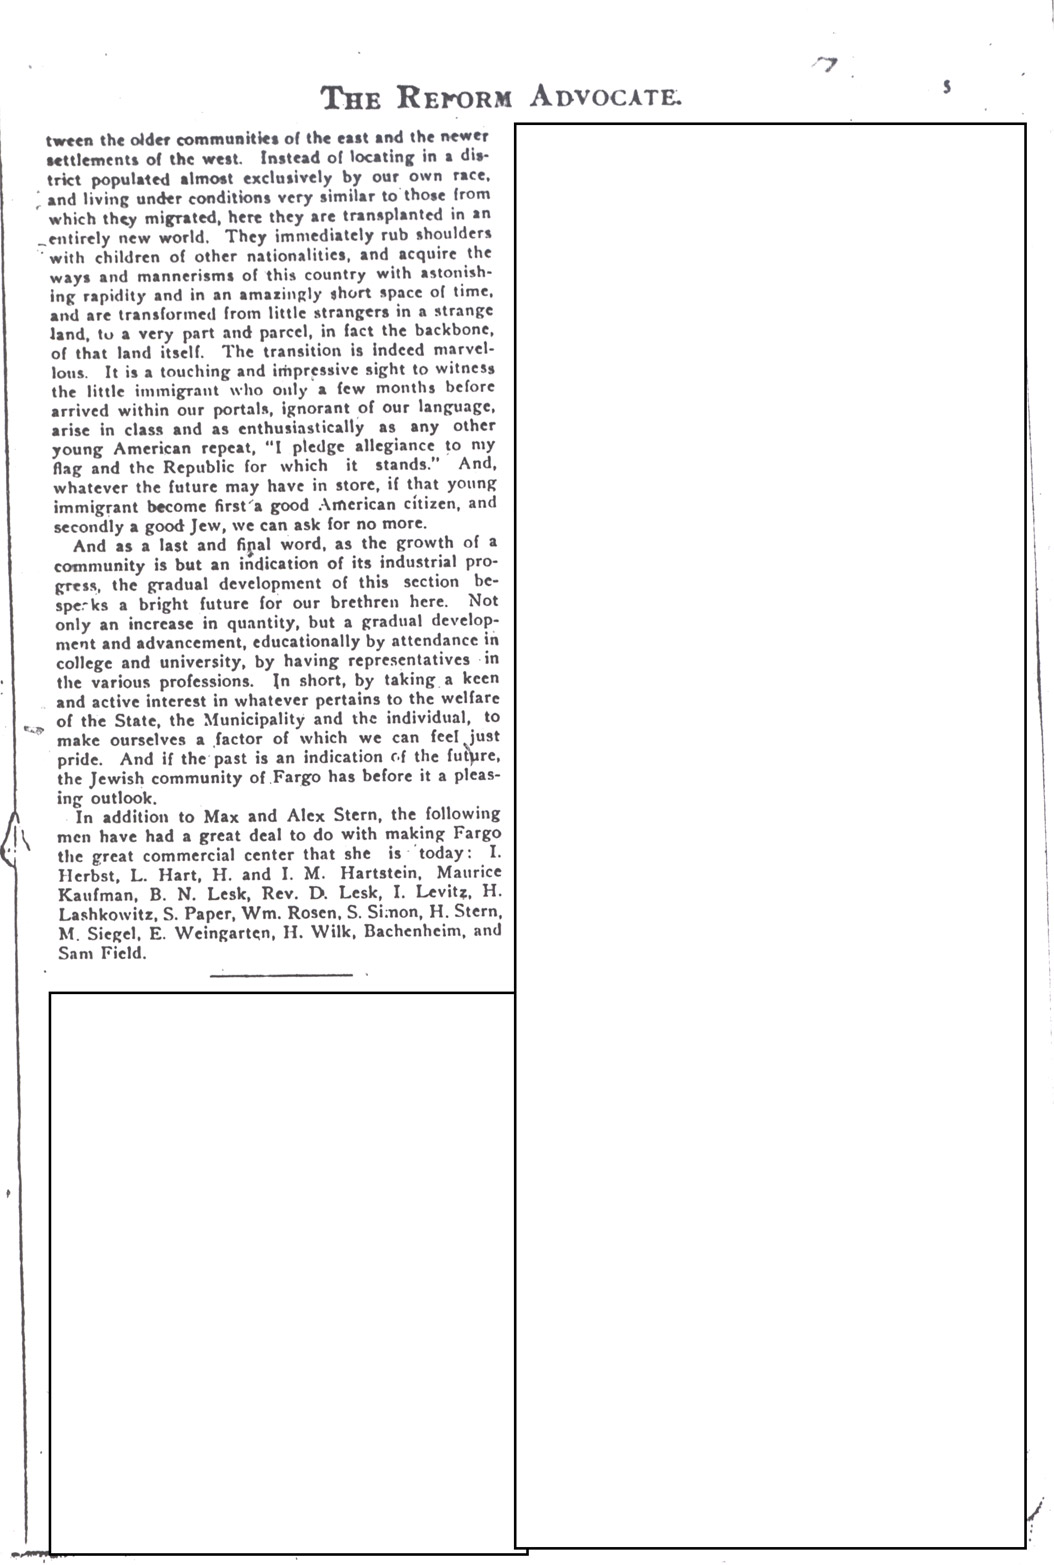 This article, “History of the Jews of Fargo” appeared in a national publication, The Reform Advocate on December 13, 1913. The article tells of the situation of the Jewish community in Fargo and some of the important Jewish city leaders.